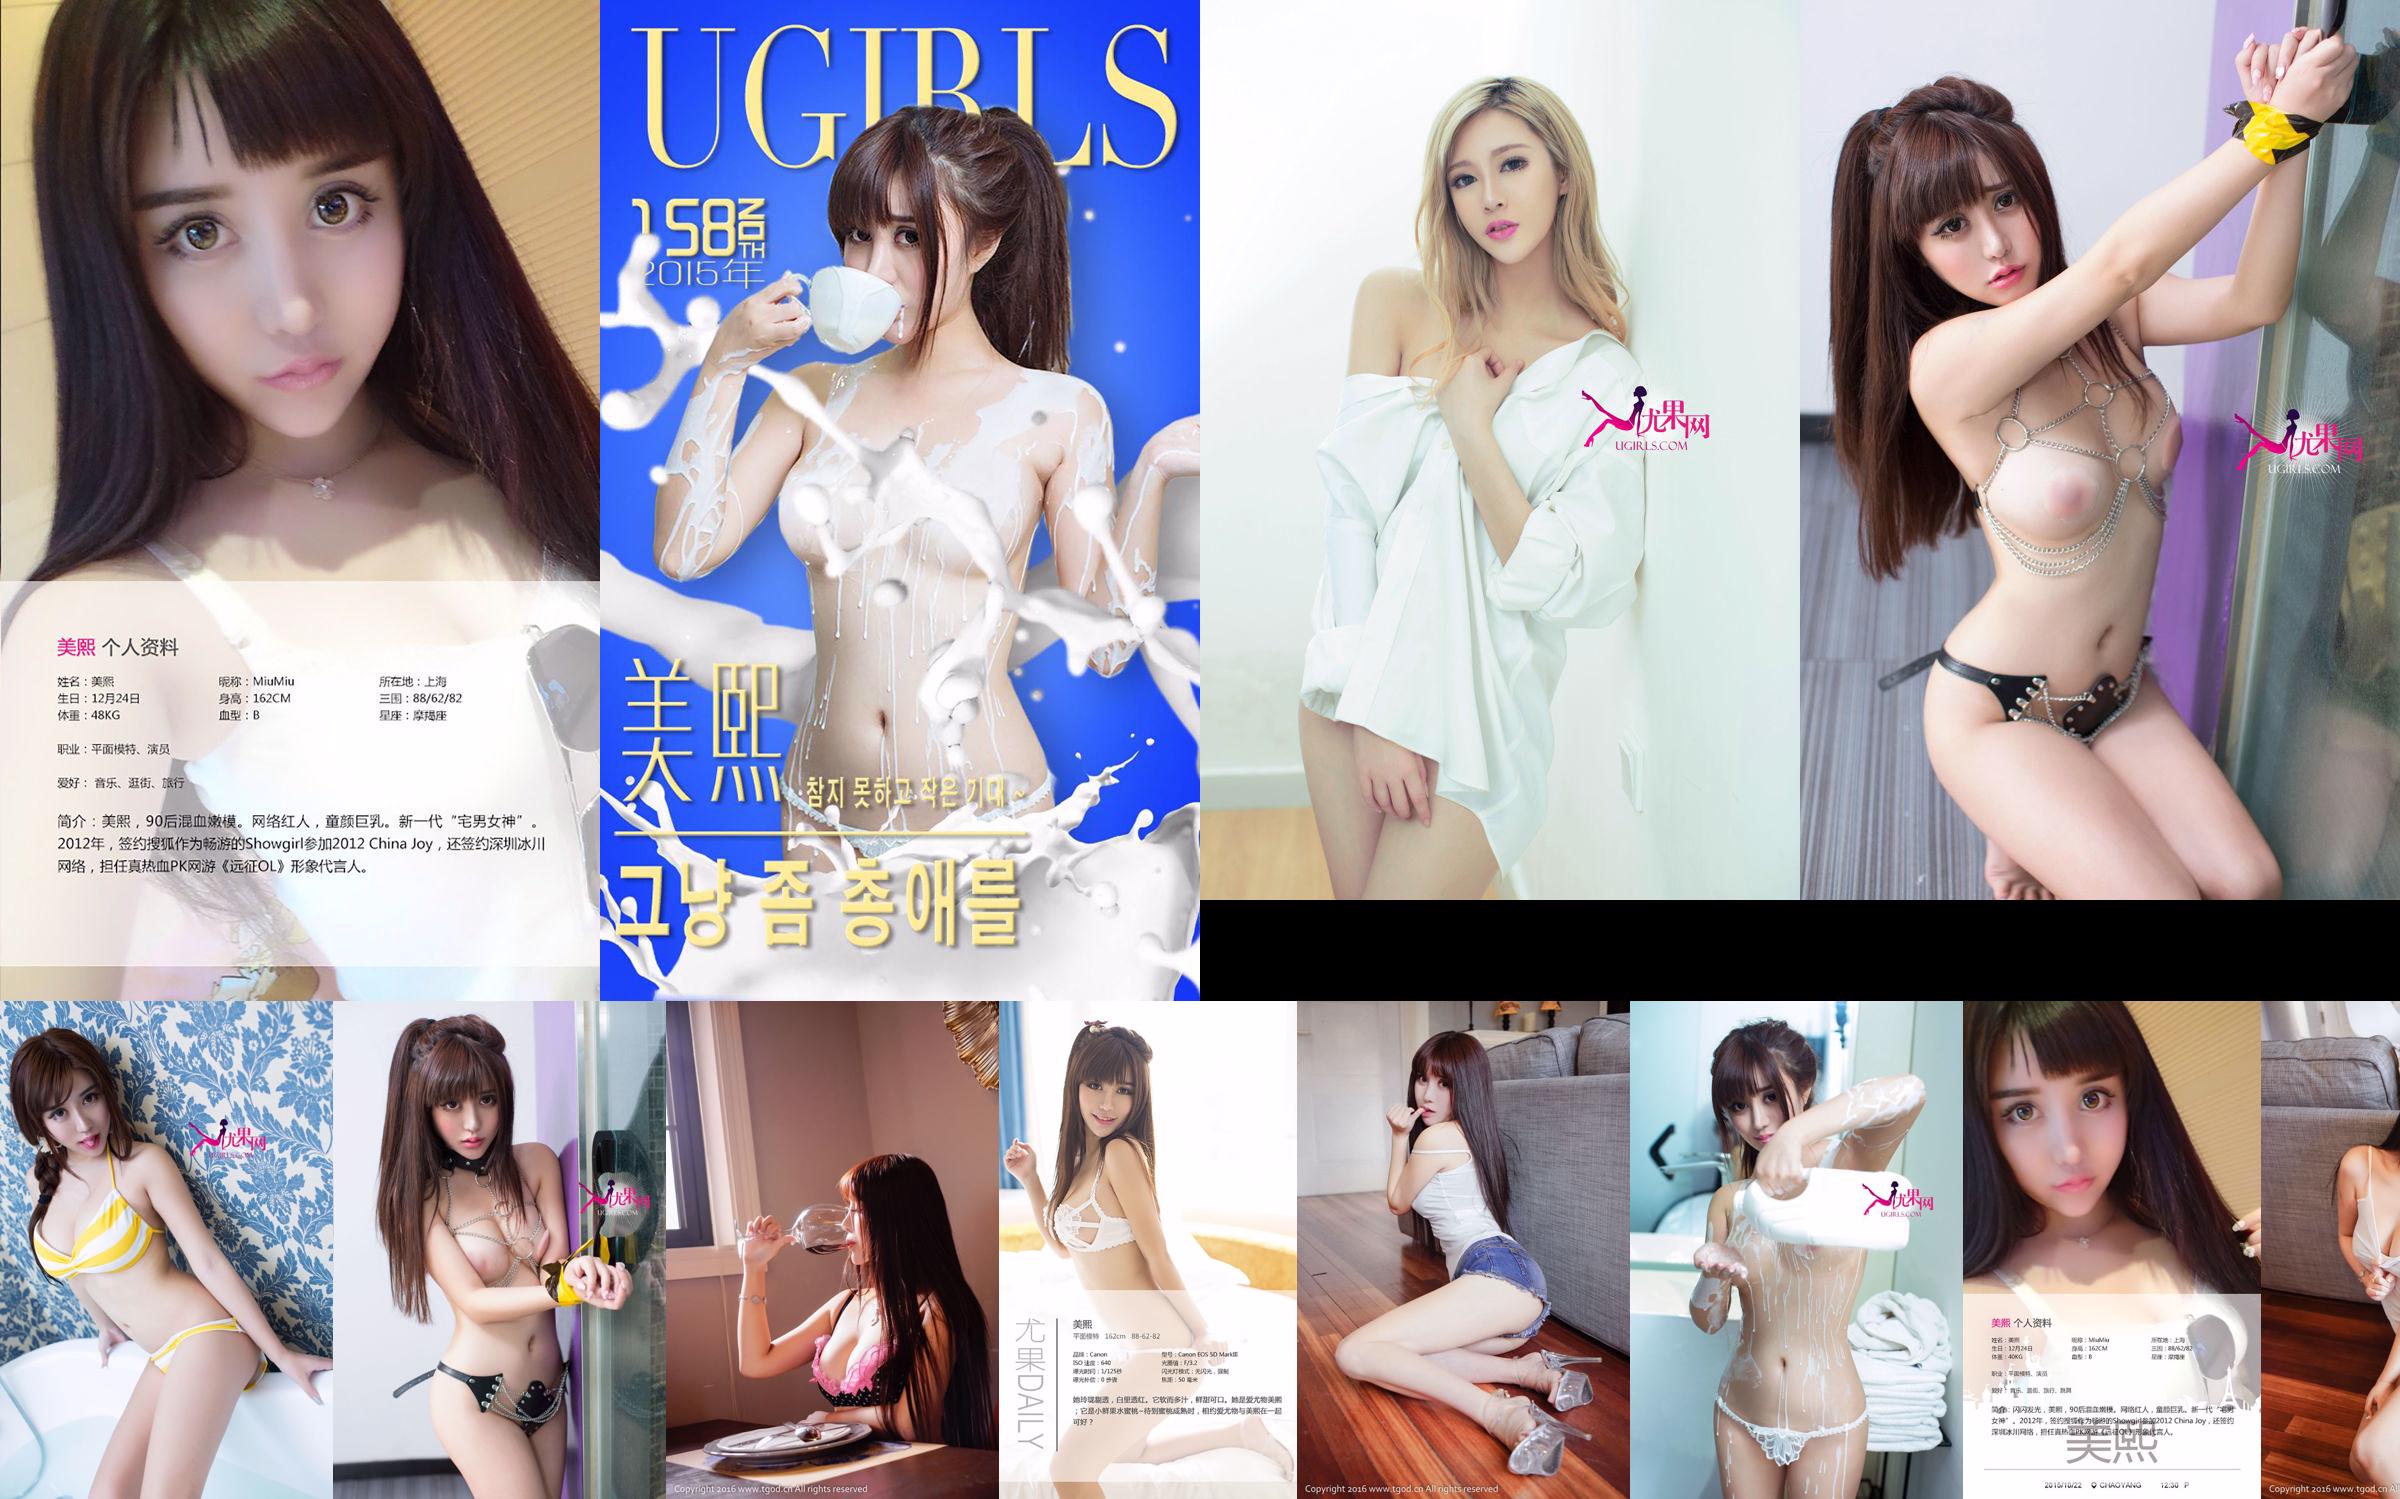 Miu Miu "The Little Expectation That Can't Be Held" [Love Youwu Ugirls] No.158 No.cf30c1 Page 1